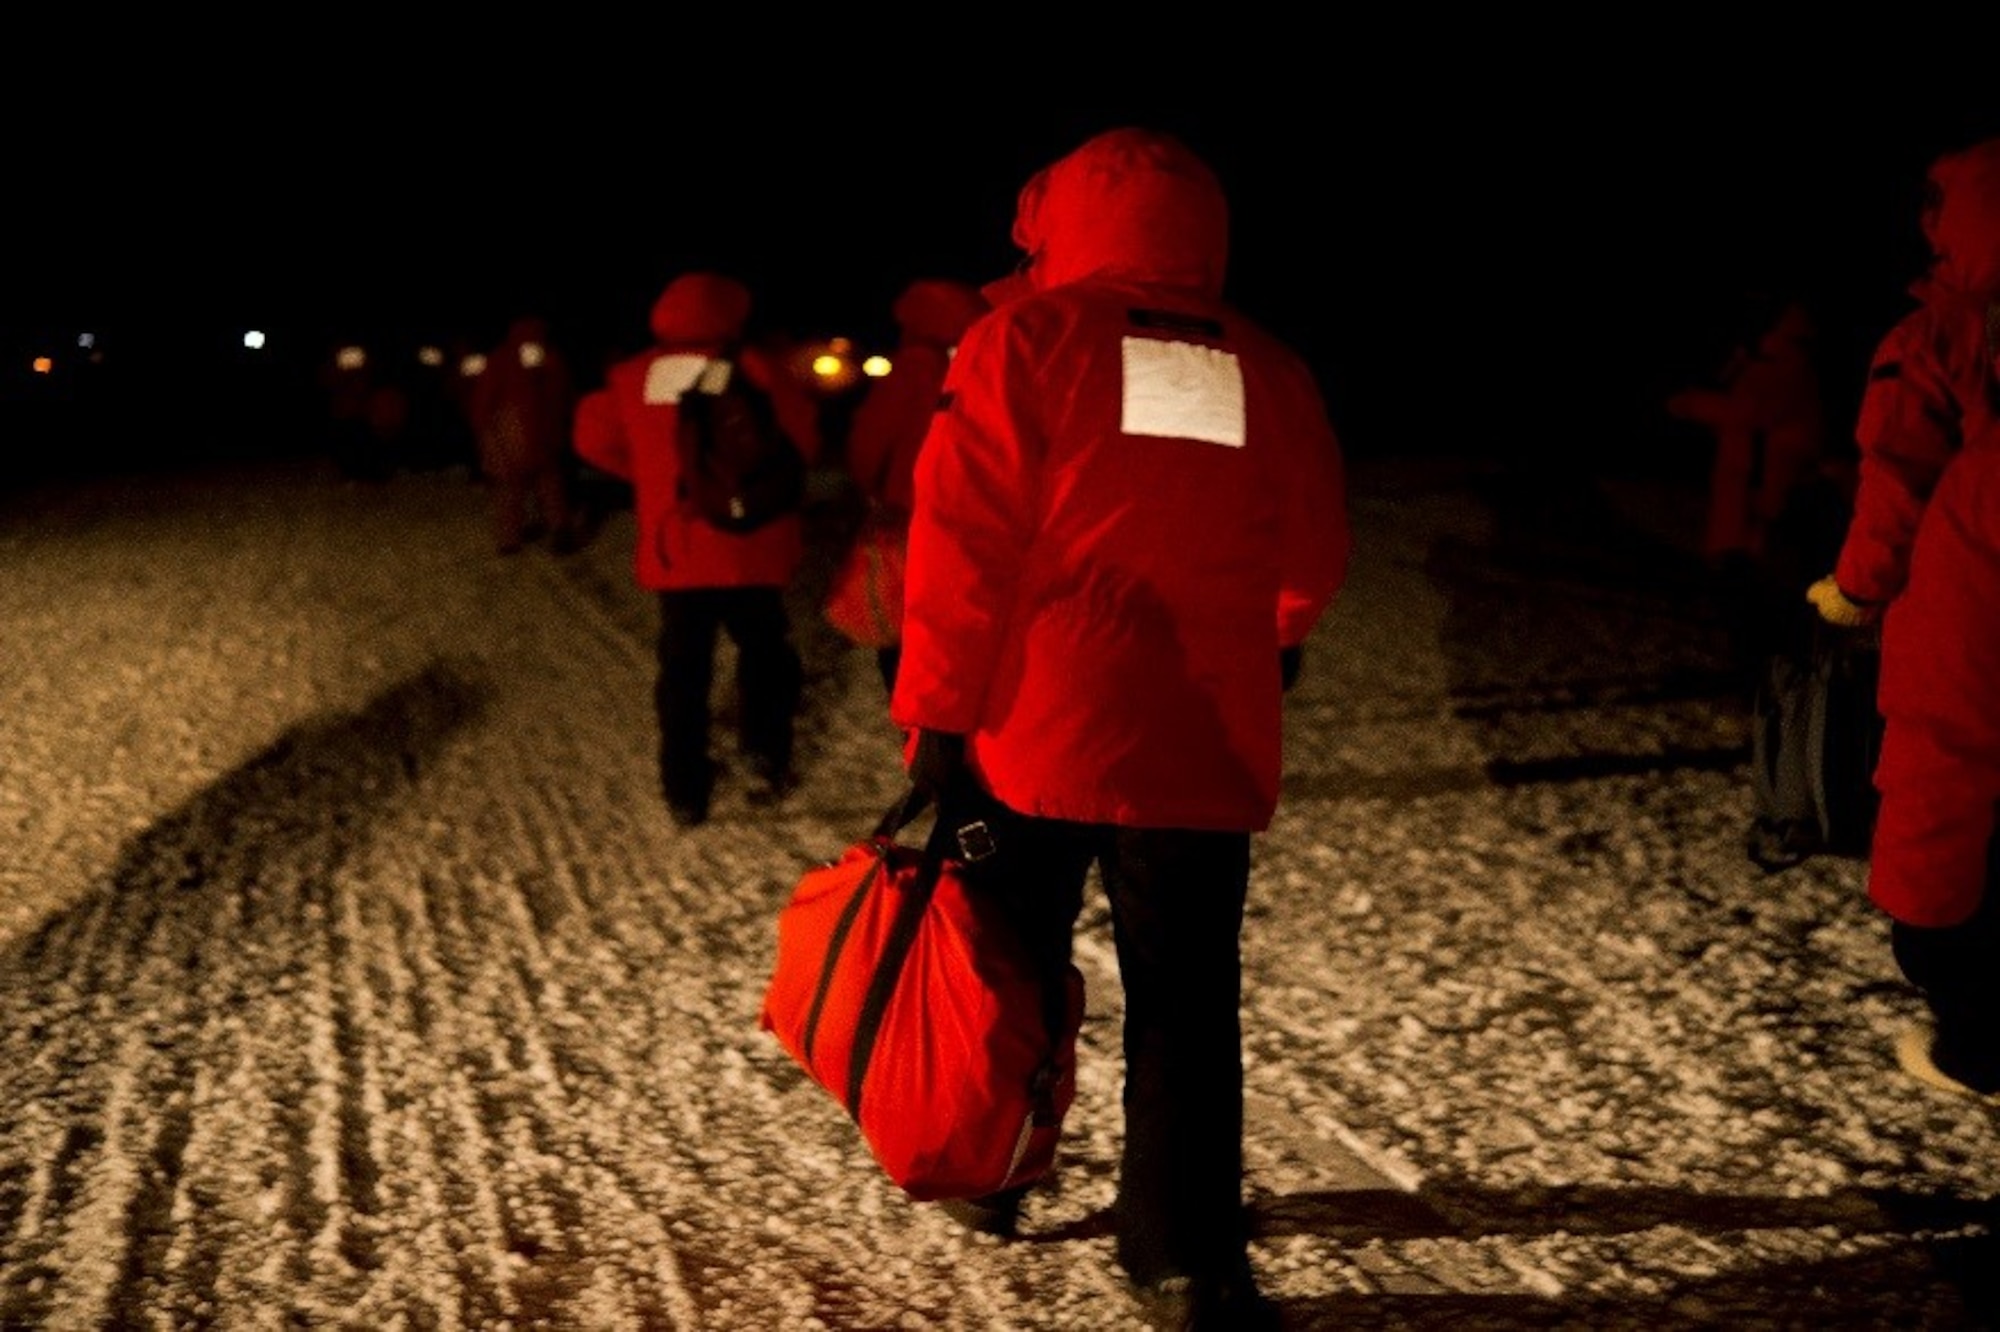 Passengers depart from a U.S. Air Force C-17 Globemaster III and make their way to McMurdo Station, Antarctica, during Operation Deep Freeze (ODF), July 15, 2016, at Pegasus Ice Runway. ODF is a joint operation between the U.S. Air Force, the National Science Foundation, and the Royal New Zealand Air Force. (U.S. Air Force Reserve photo by Staff Sgt. Madelyn McCullough)